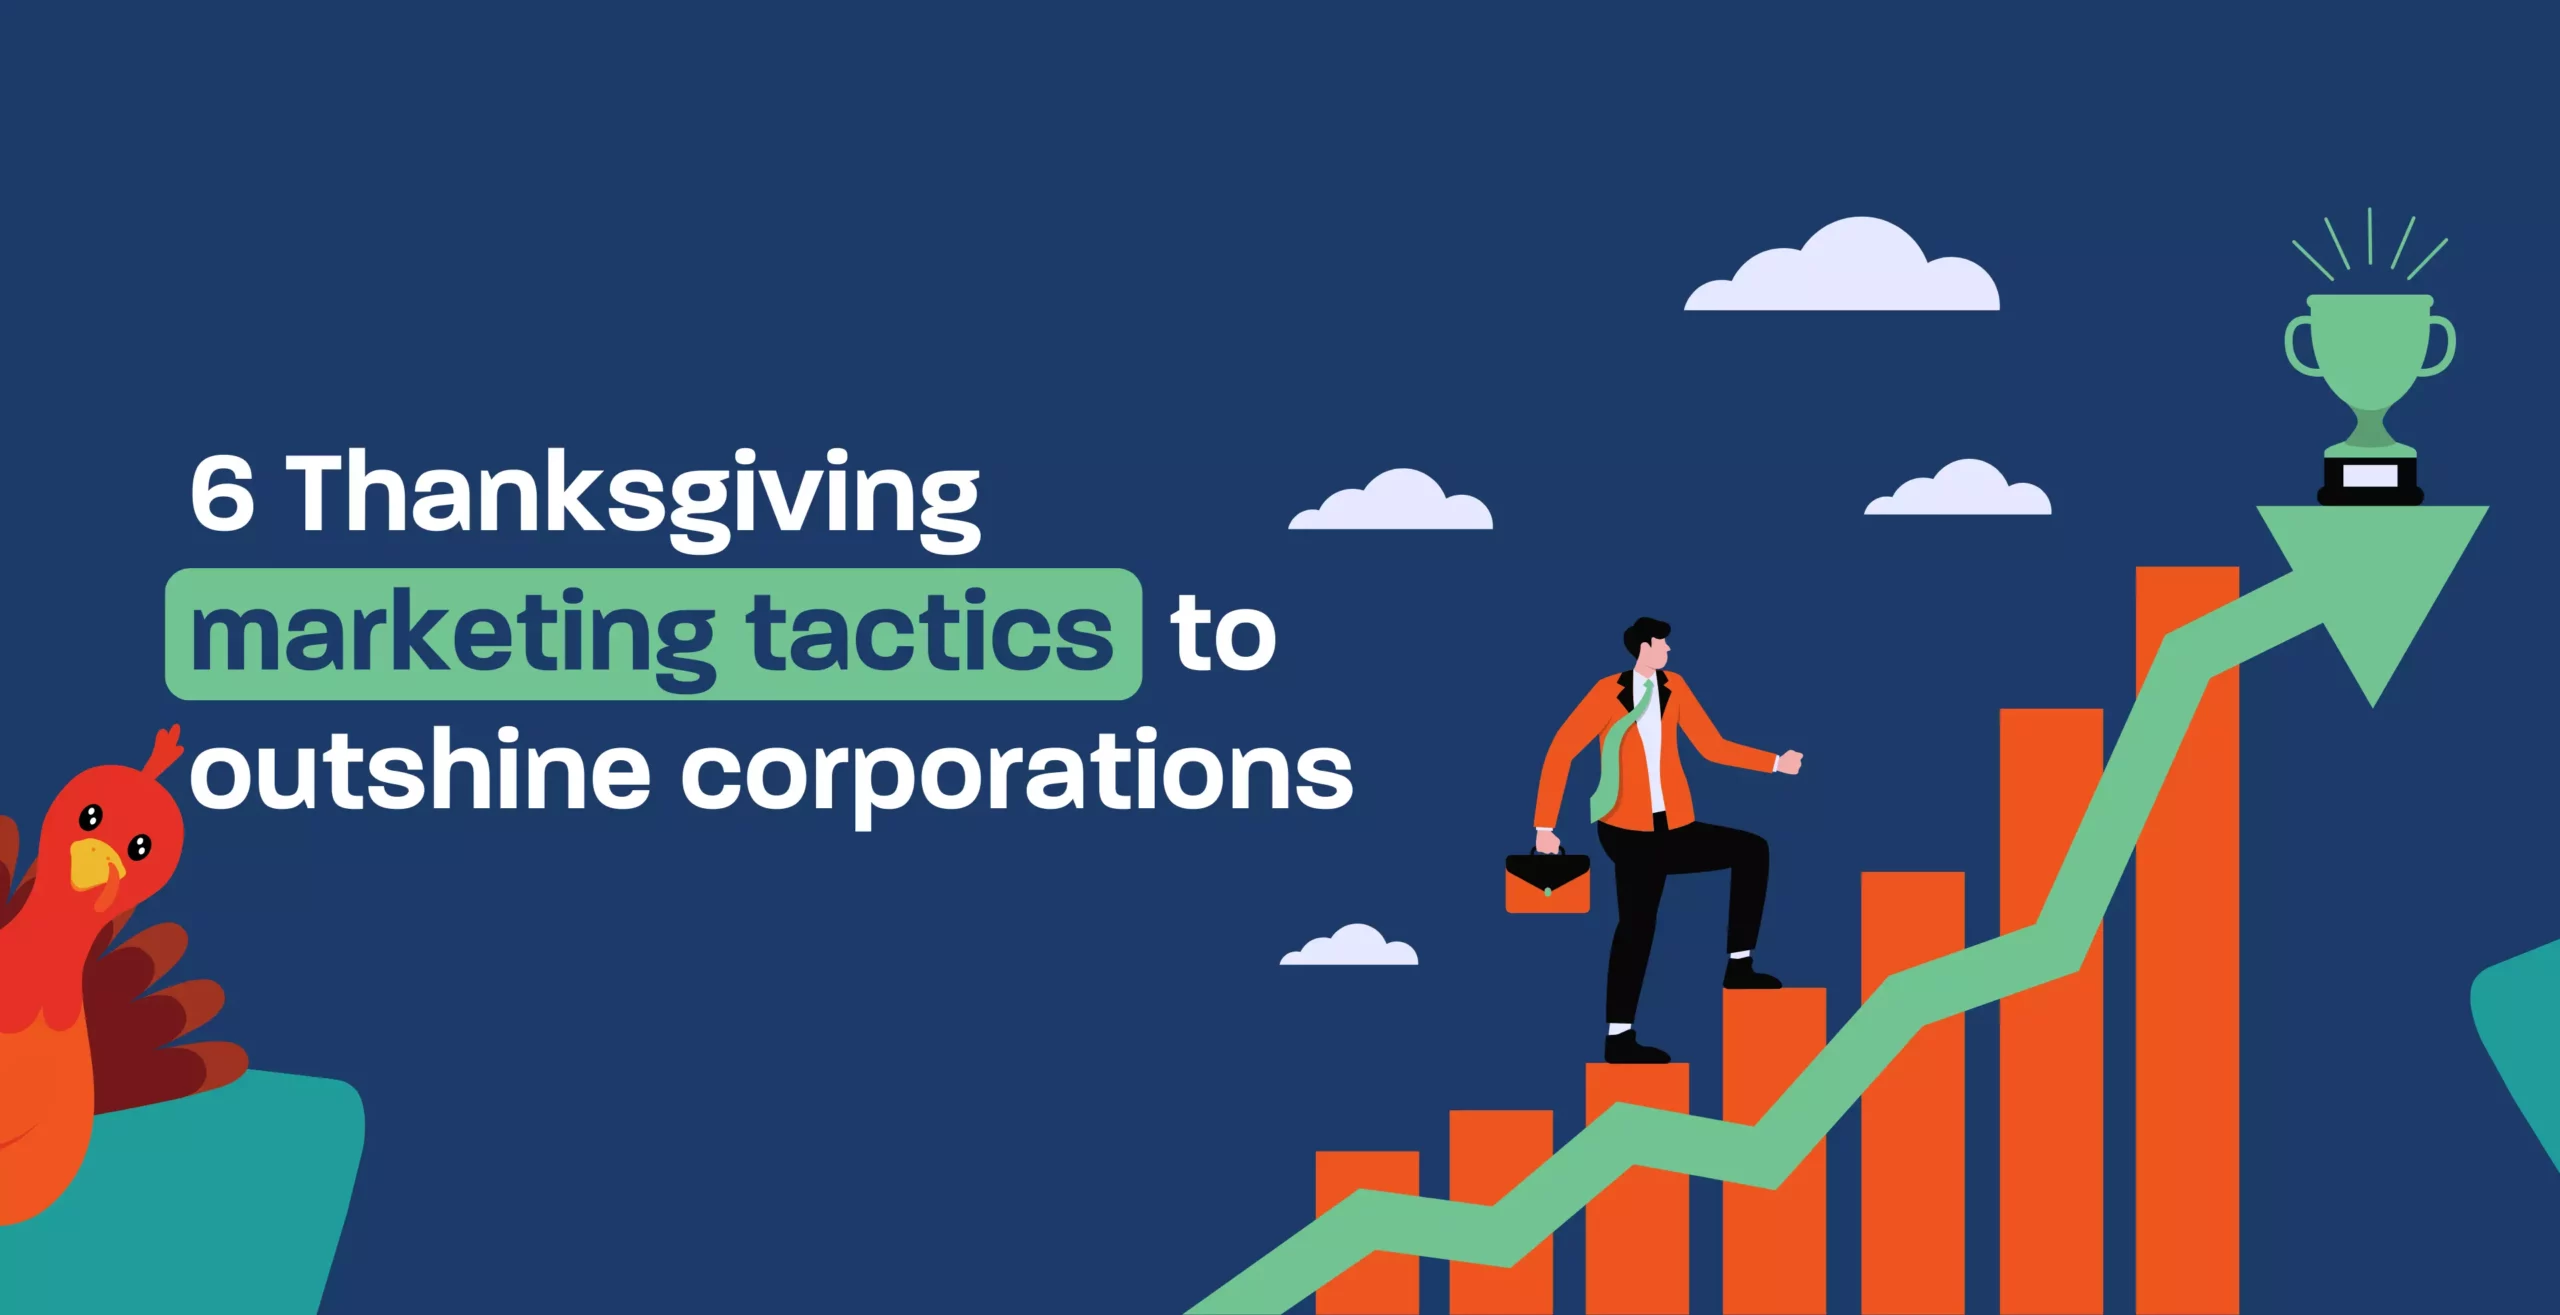 6 Thanksgiving marketing tactics to outshine corporations